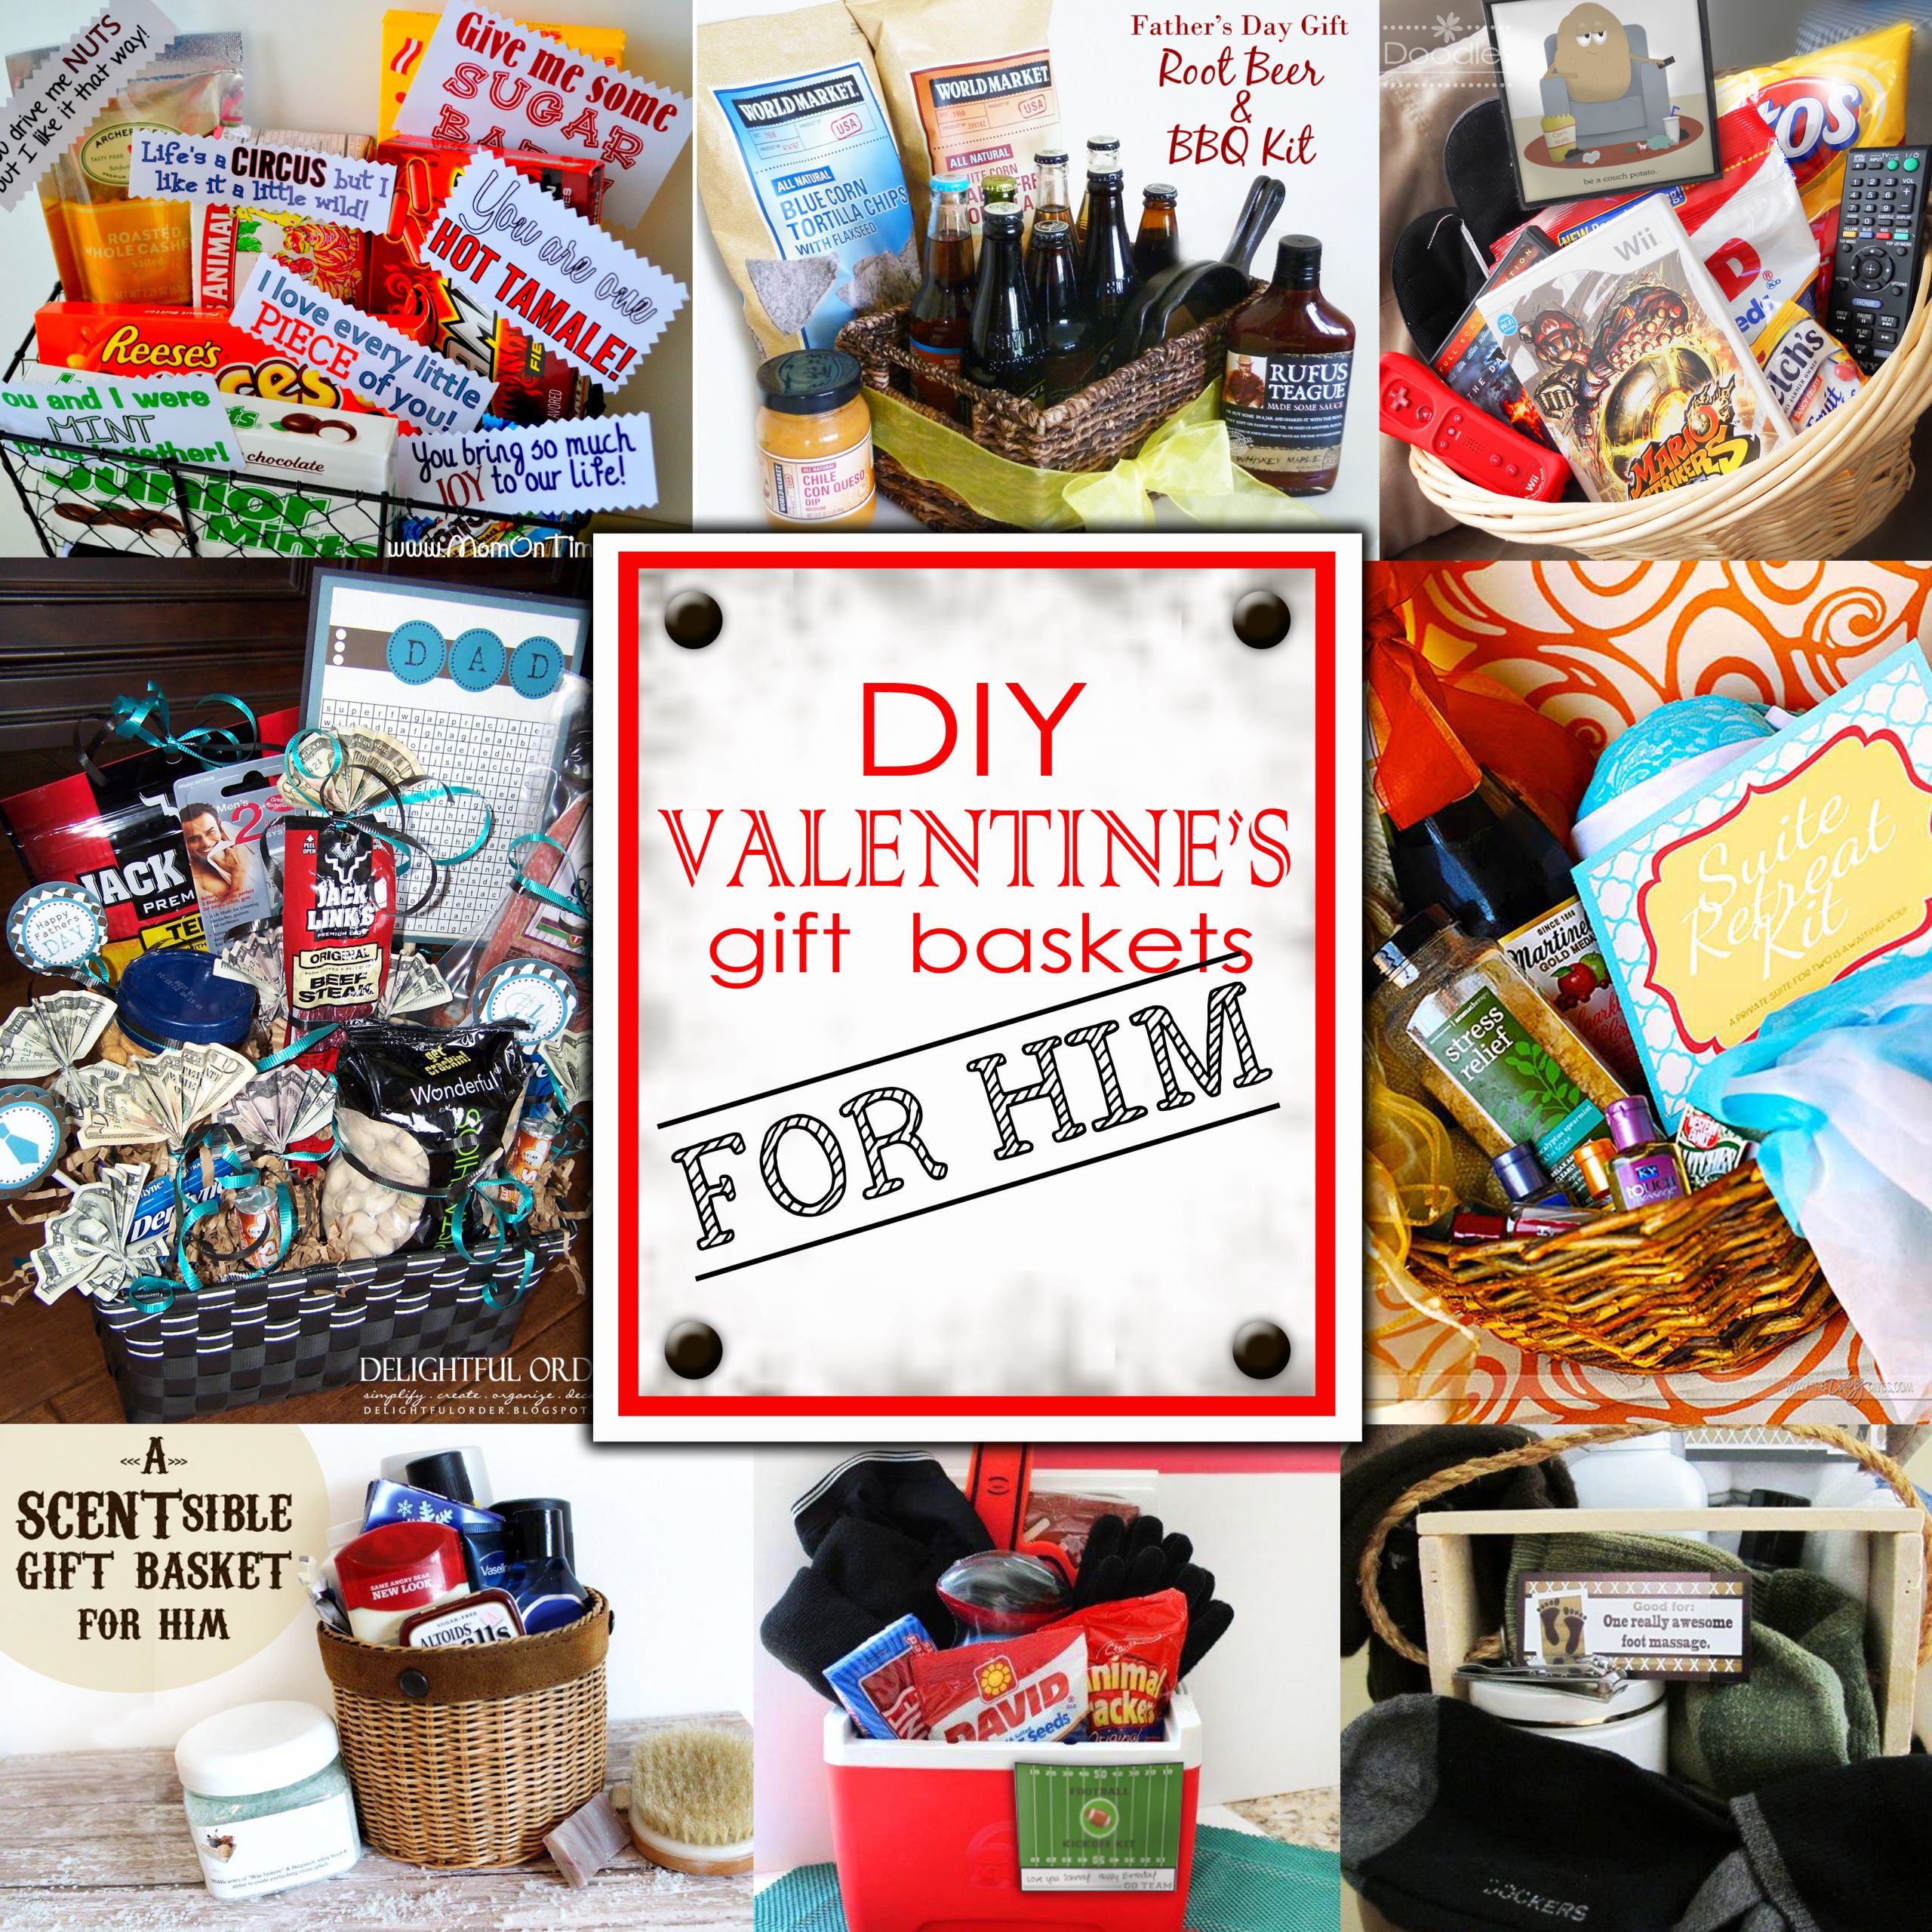 Valentines Day Gifts for Men Beautiful Diy Valentine S Day Gift Baskets for Him Darling Doodles